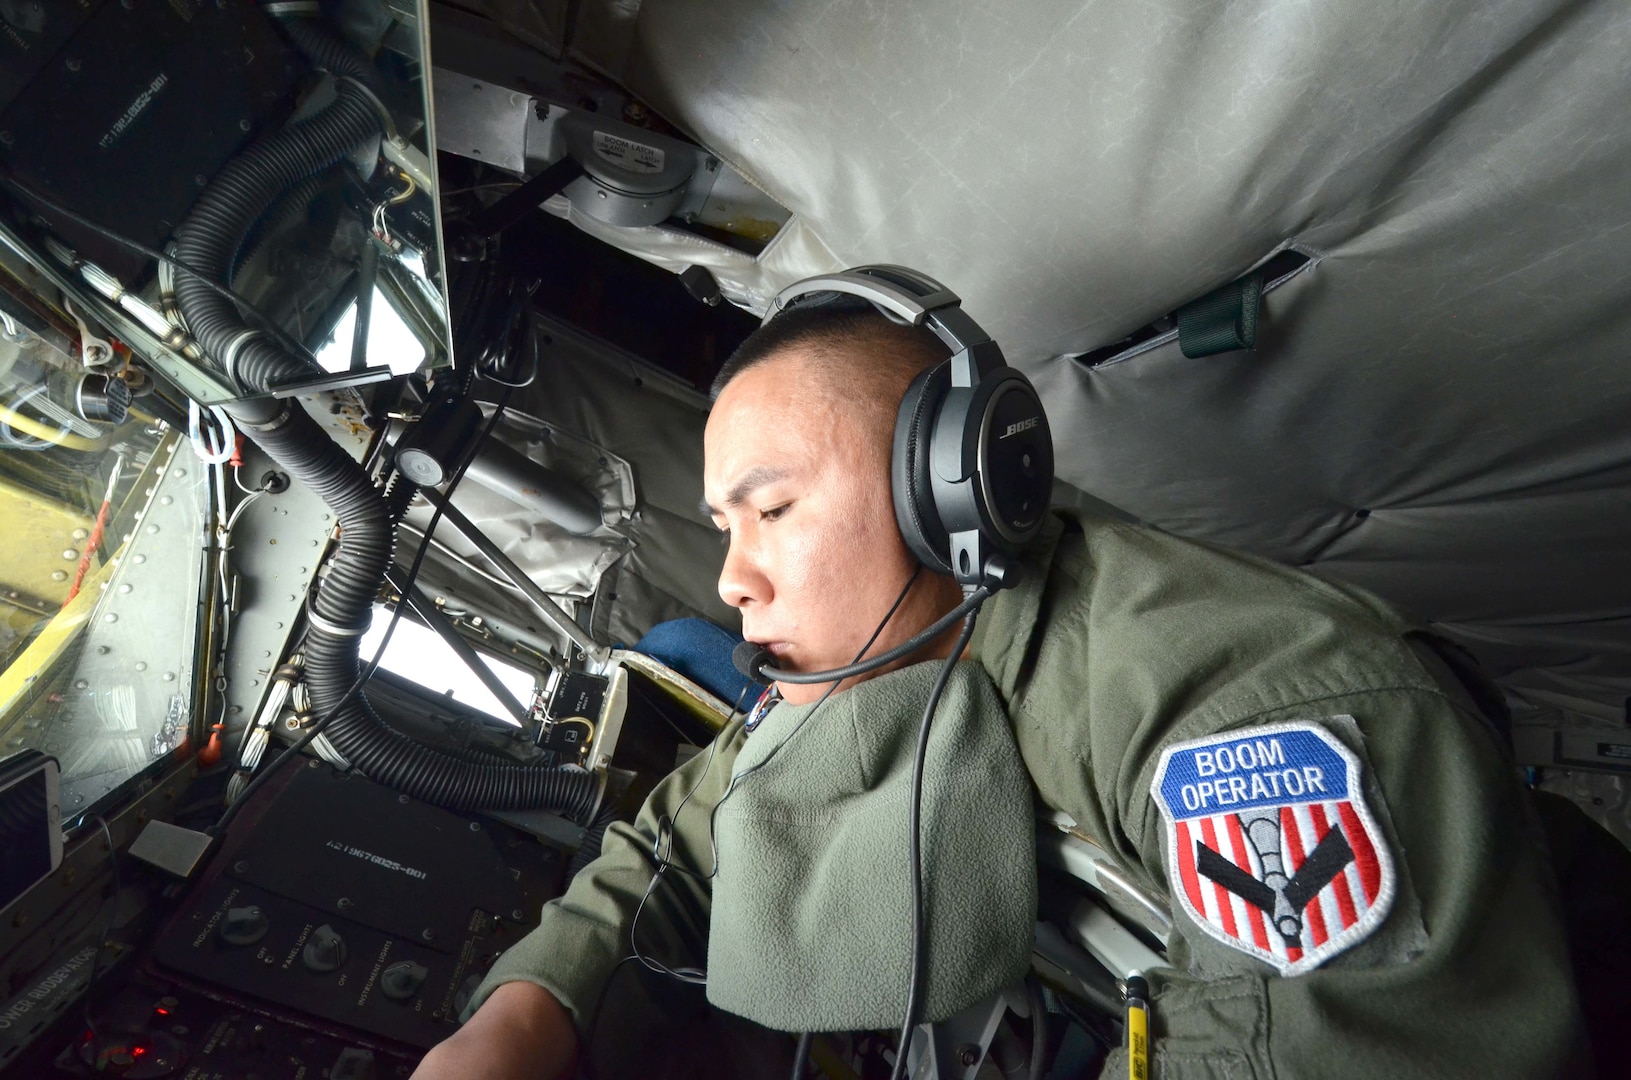 Staff Sgt. Kevin Gimenez, a KC-135 Stratotanker boom operator assigned to the Arizona Air National Guard, prepares to refuel a NATO E-3A Sentry over northern Germany during a training mission, Nov. 10, 2015. Airmen from the 161st Air Refueling Wing based in Phoenix are supporting aircrew training operations Nov. 9-20 at NATO Air Base Geilenkirchen, Germany. 